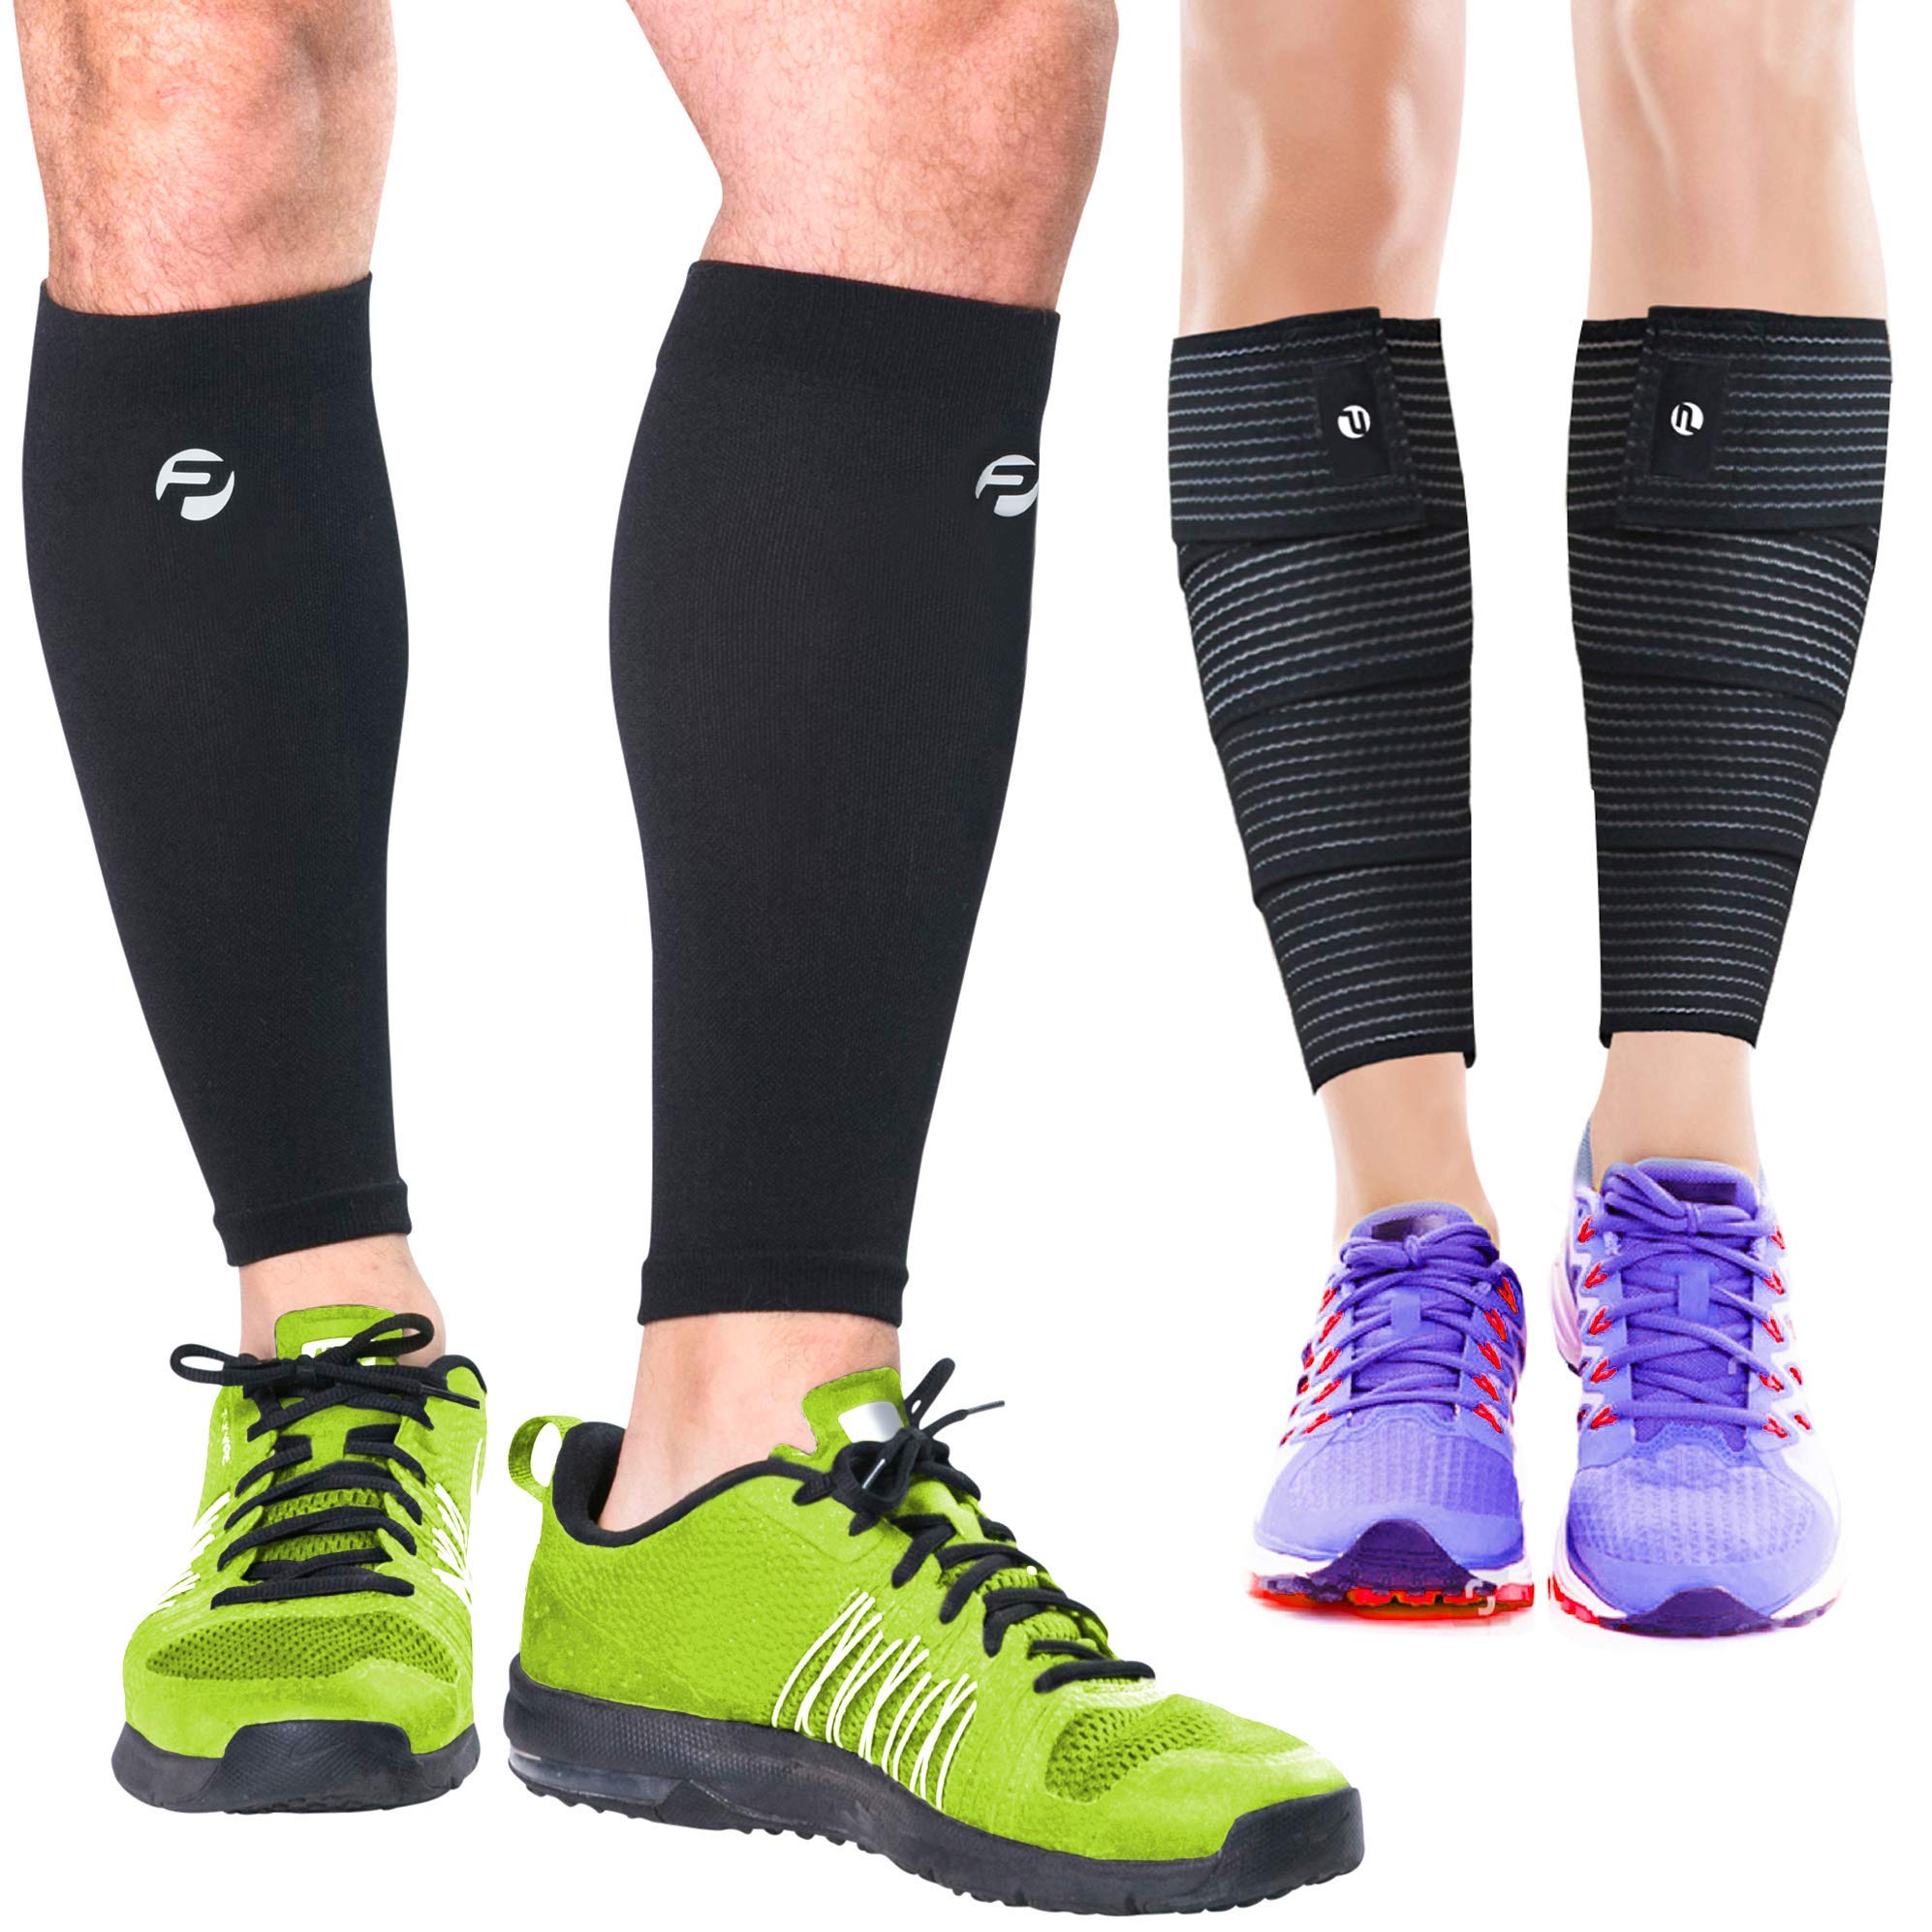  Calf Sleeves - #1 Compression Leg Sleeve for Runners